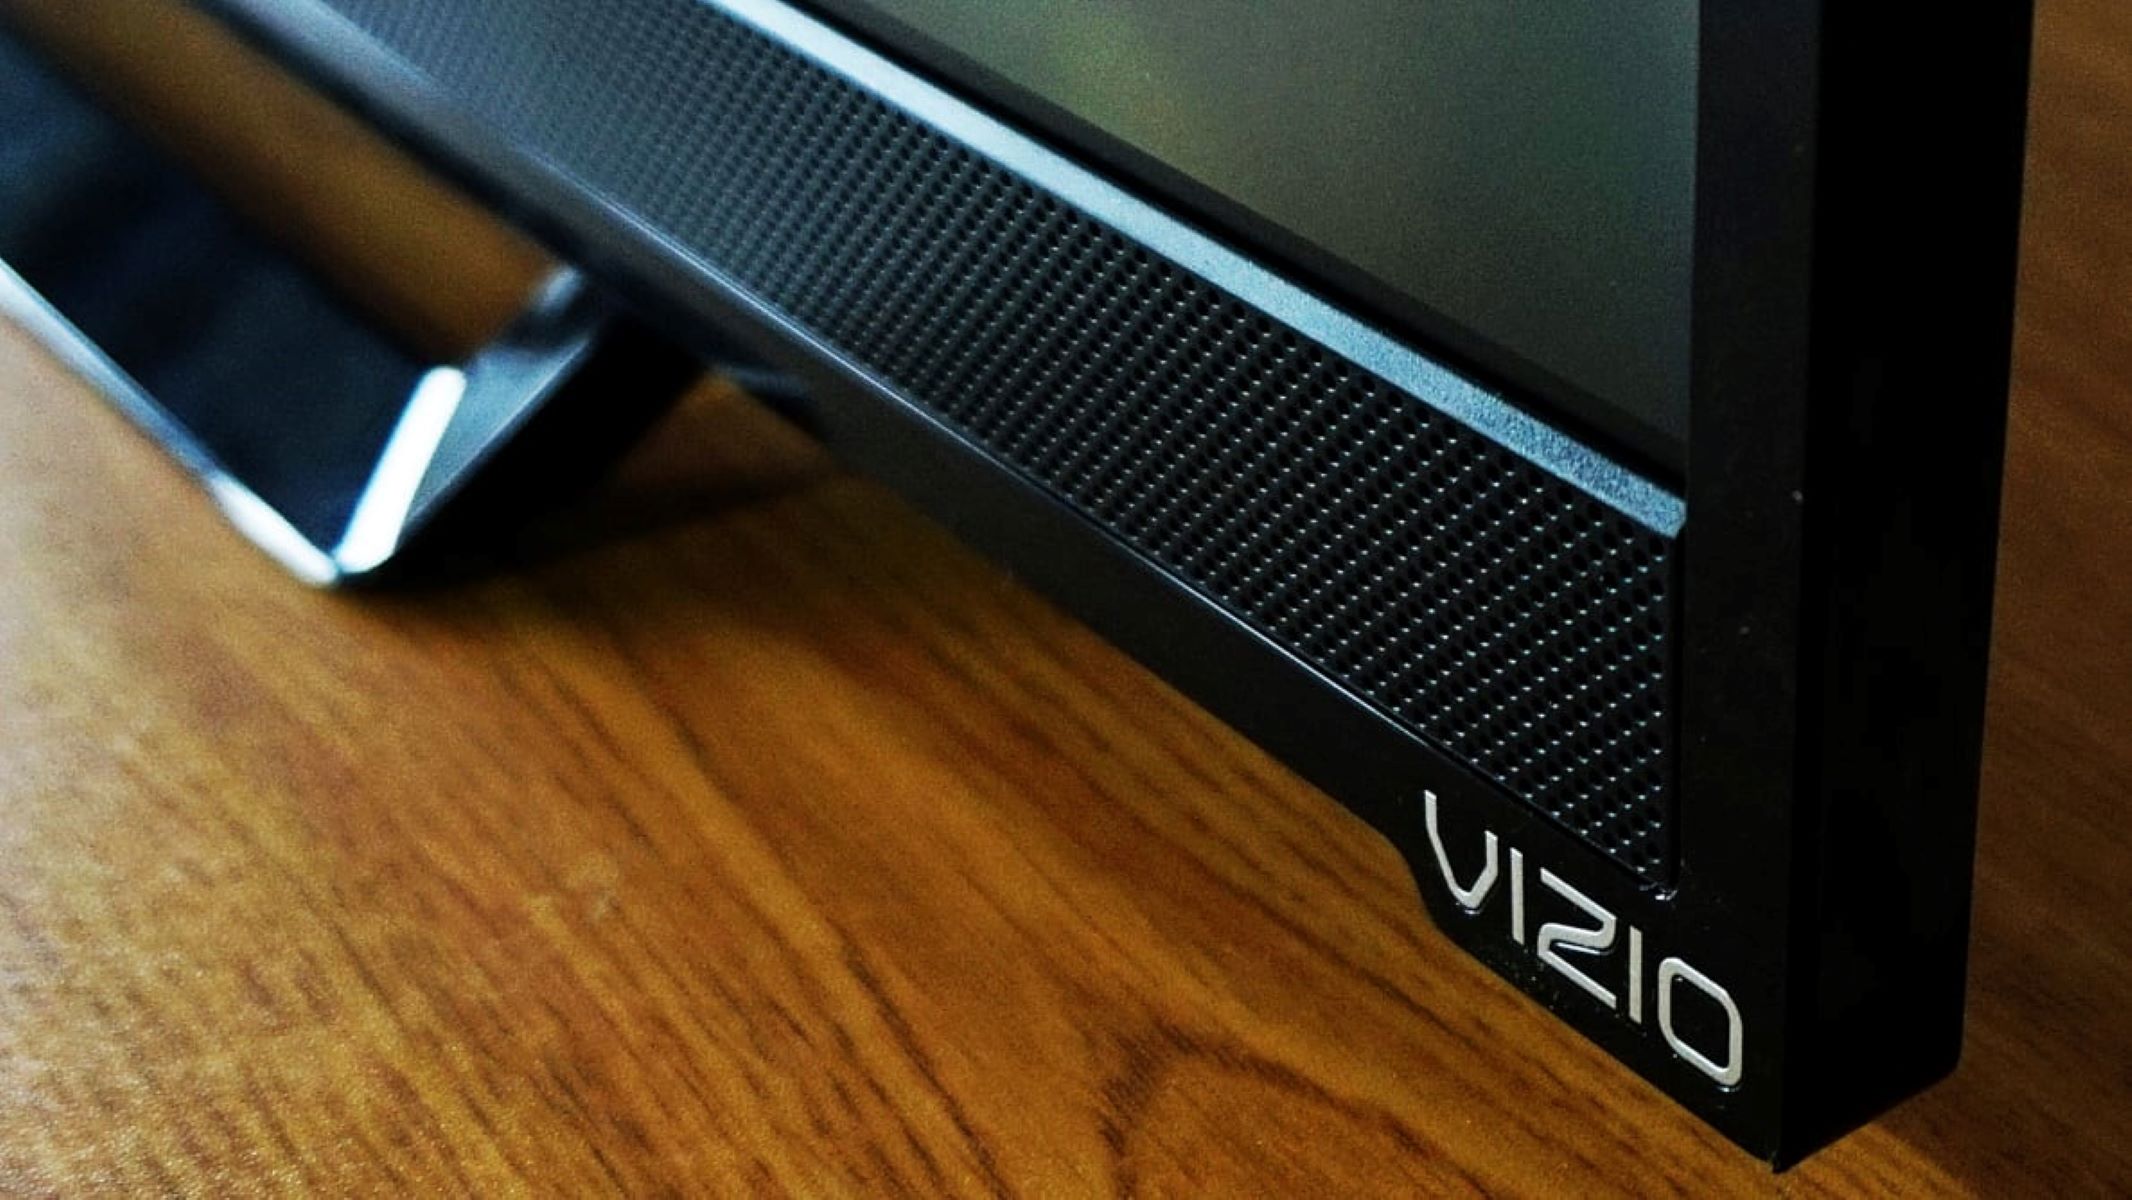 Discover If Your Vizio TV Is Bluetooth-Enabled Or Learn How To Add Bluetooth!